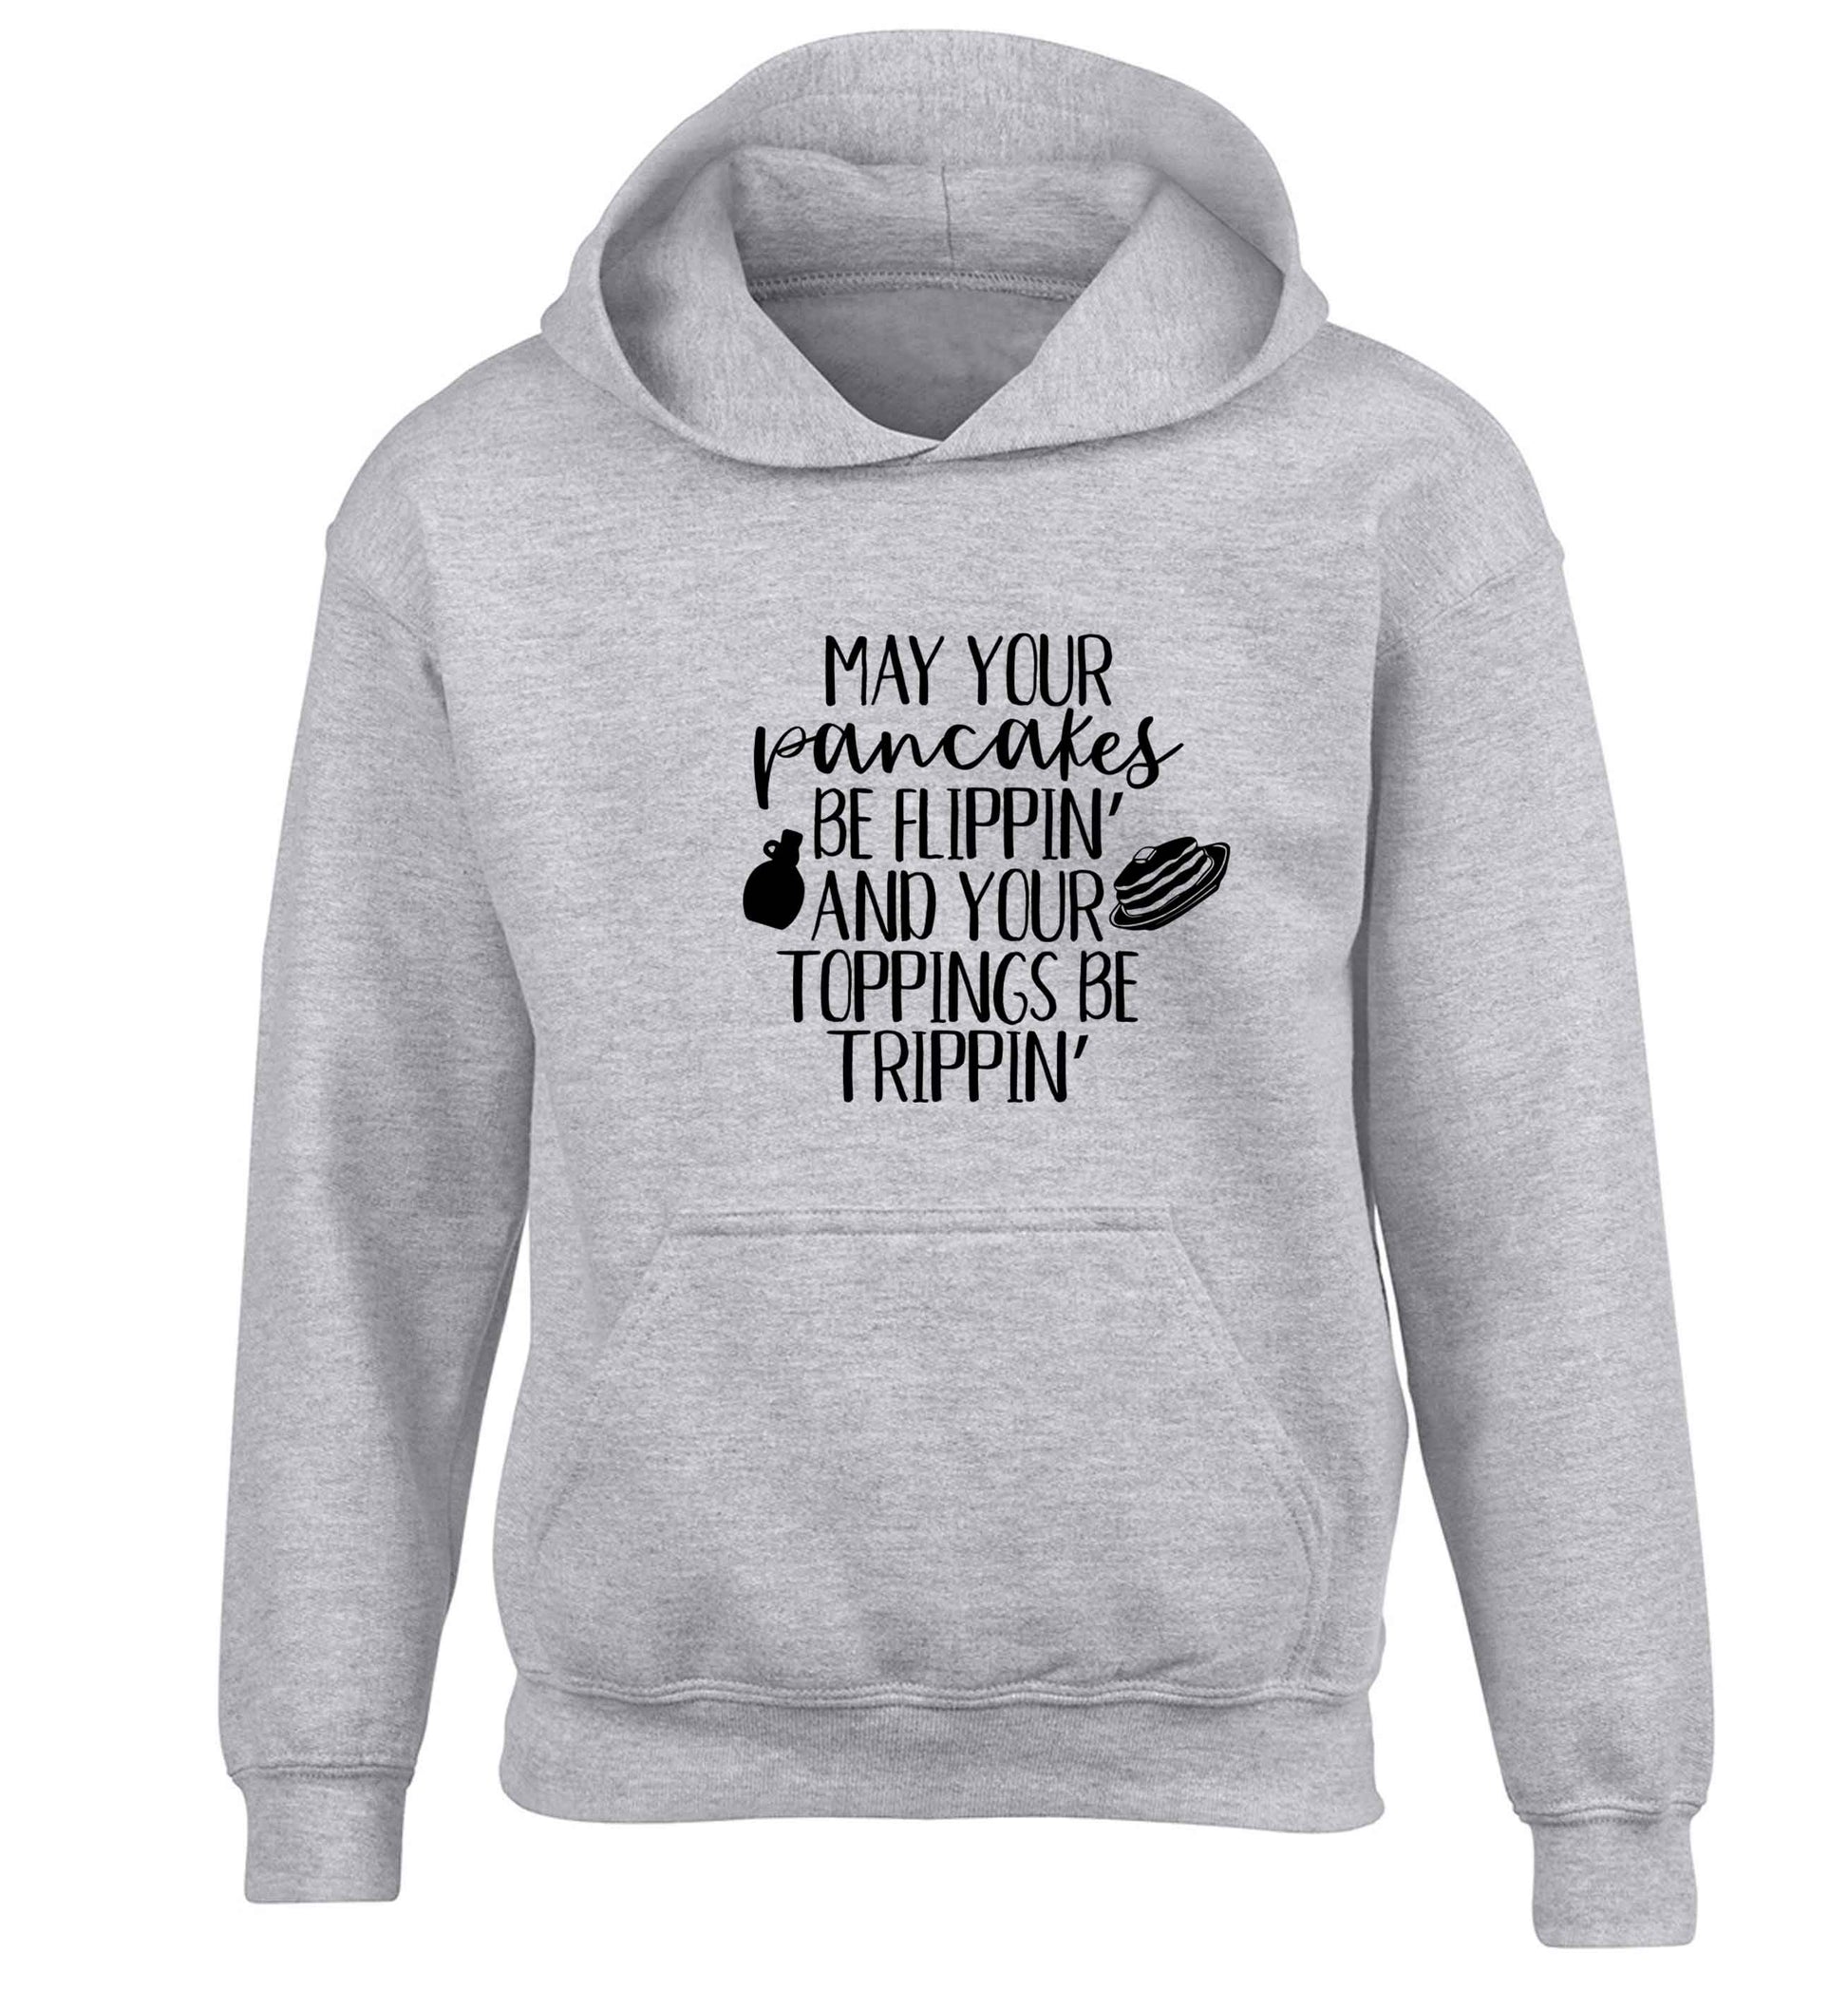 May your pancakes be flippin' and your toppings be trippin' children's grey hoodie 12-13 Years